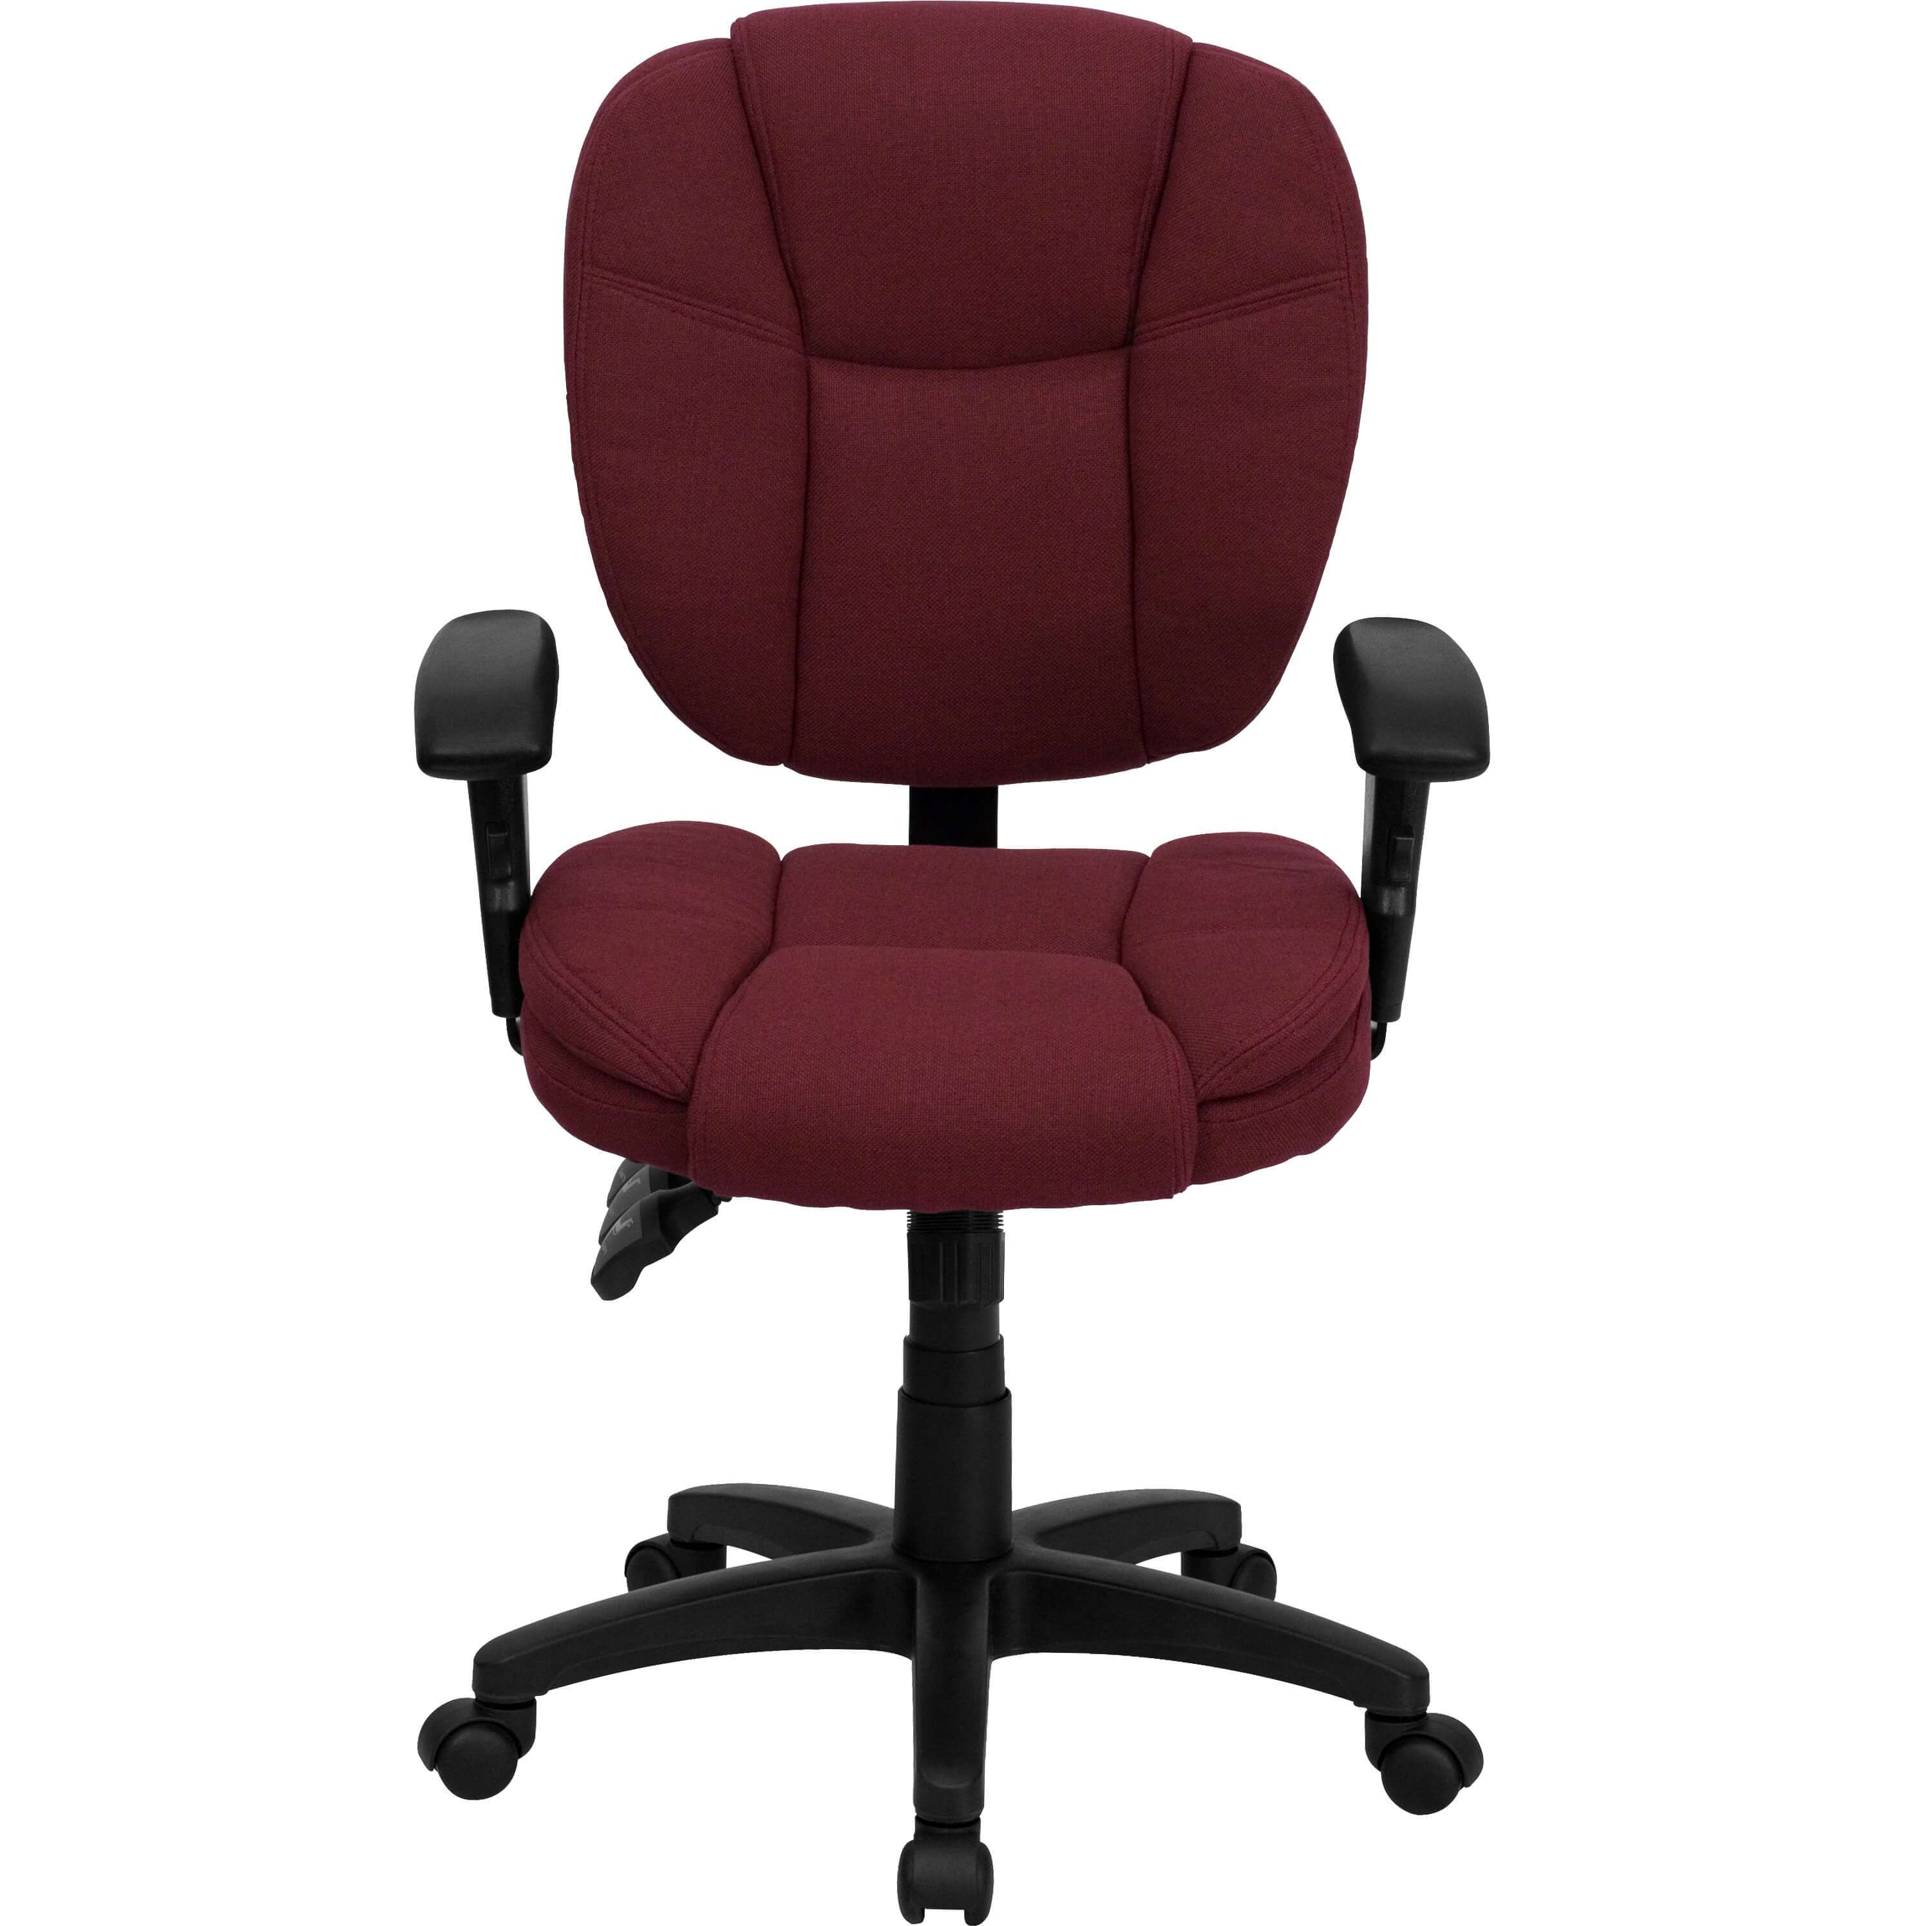 Cool desk chairs CUB GO 930F BY ARMS GG FLA